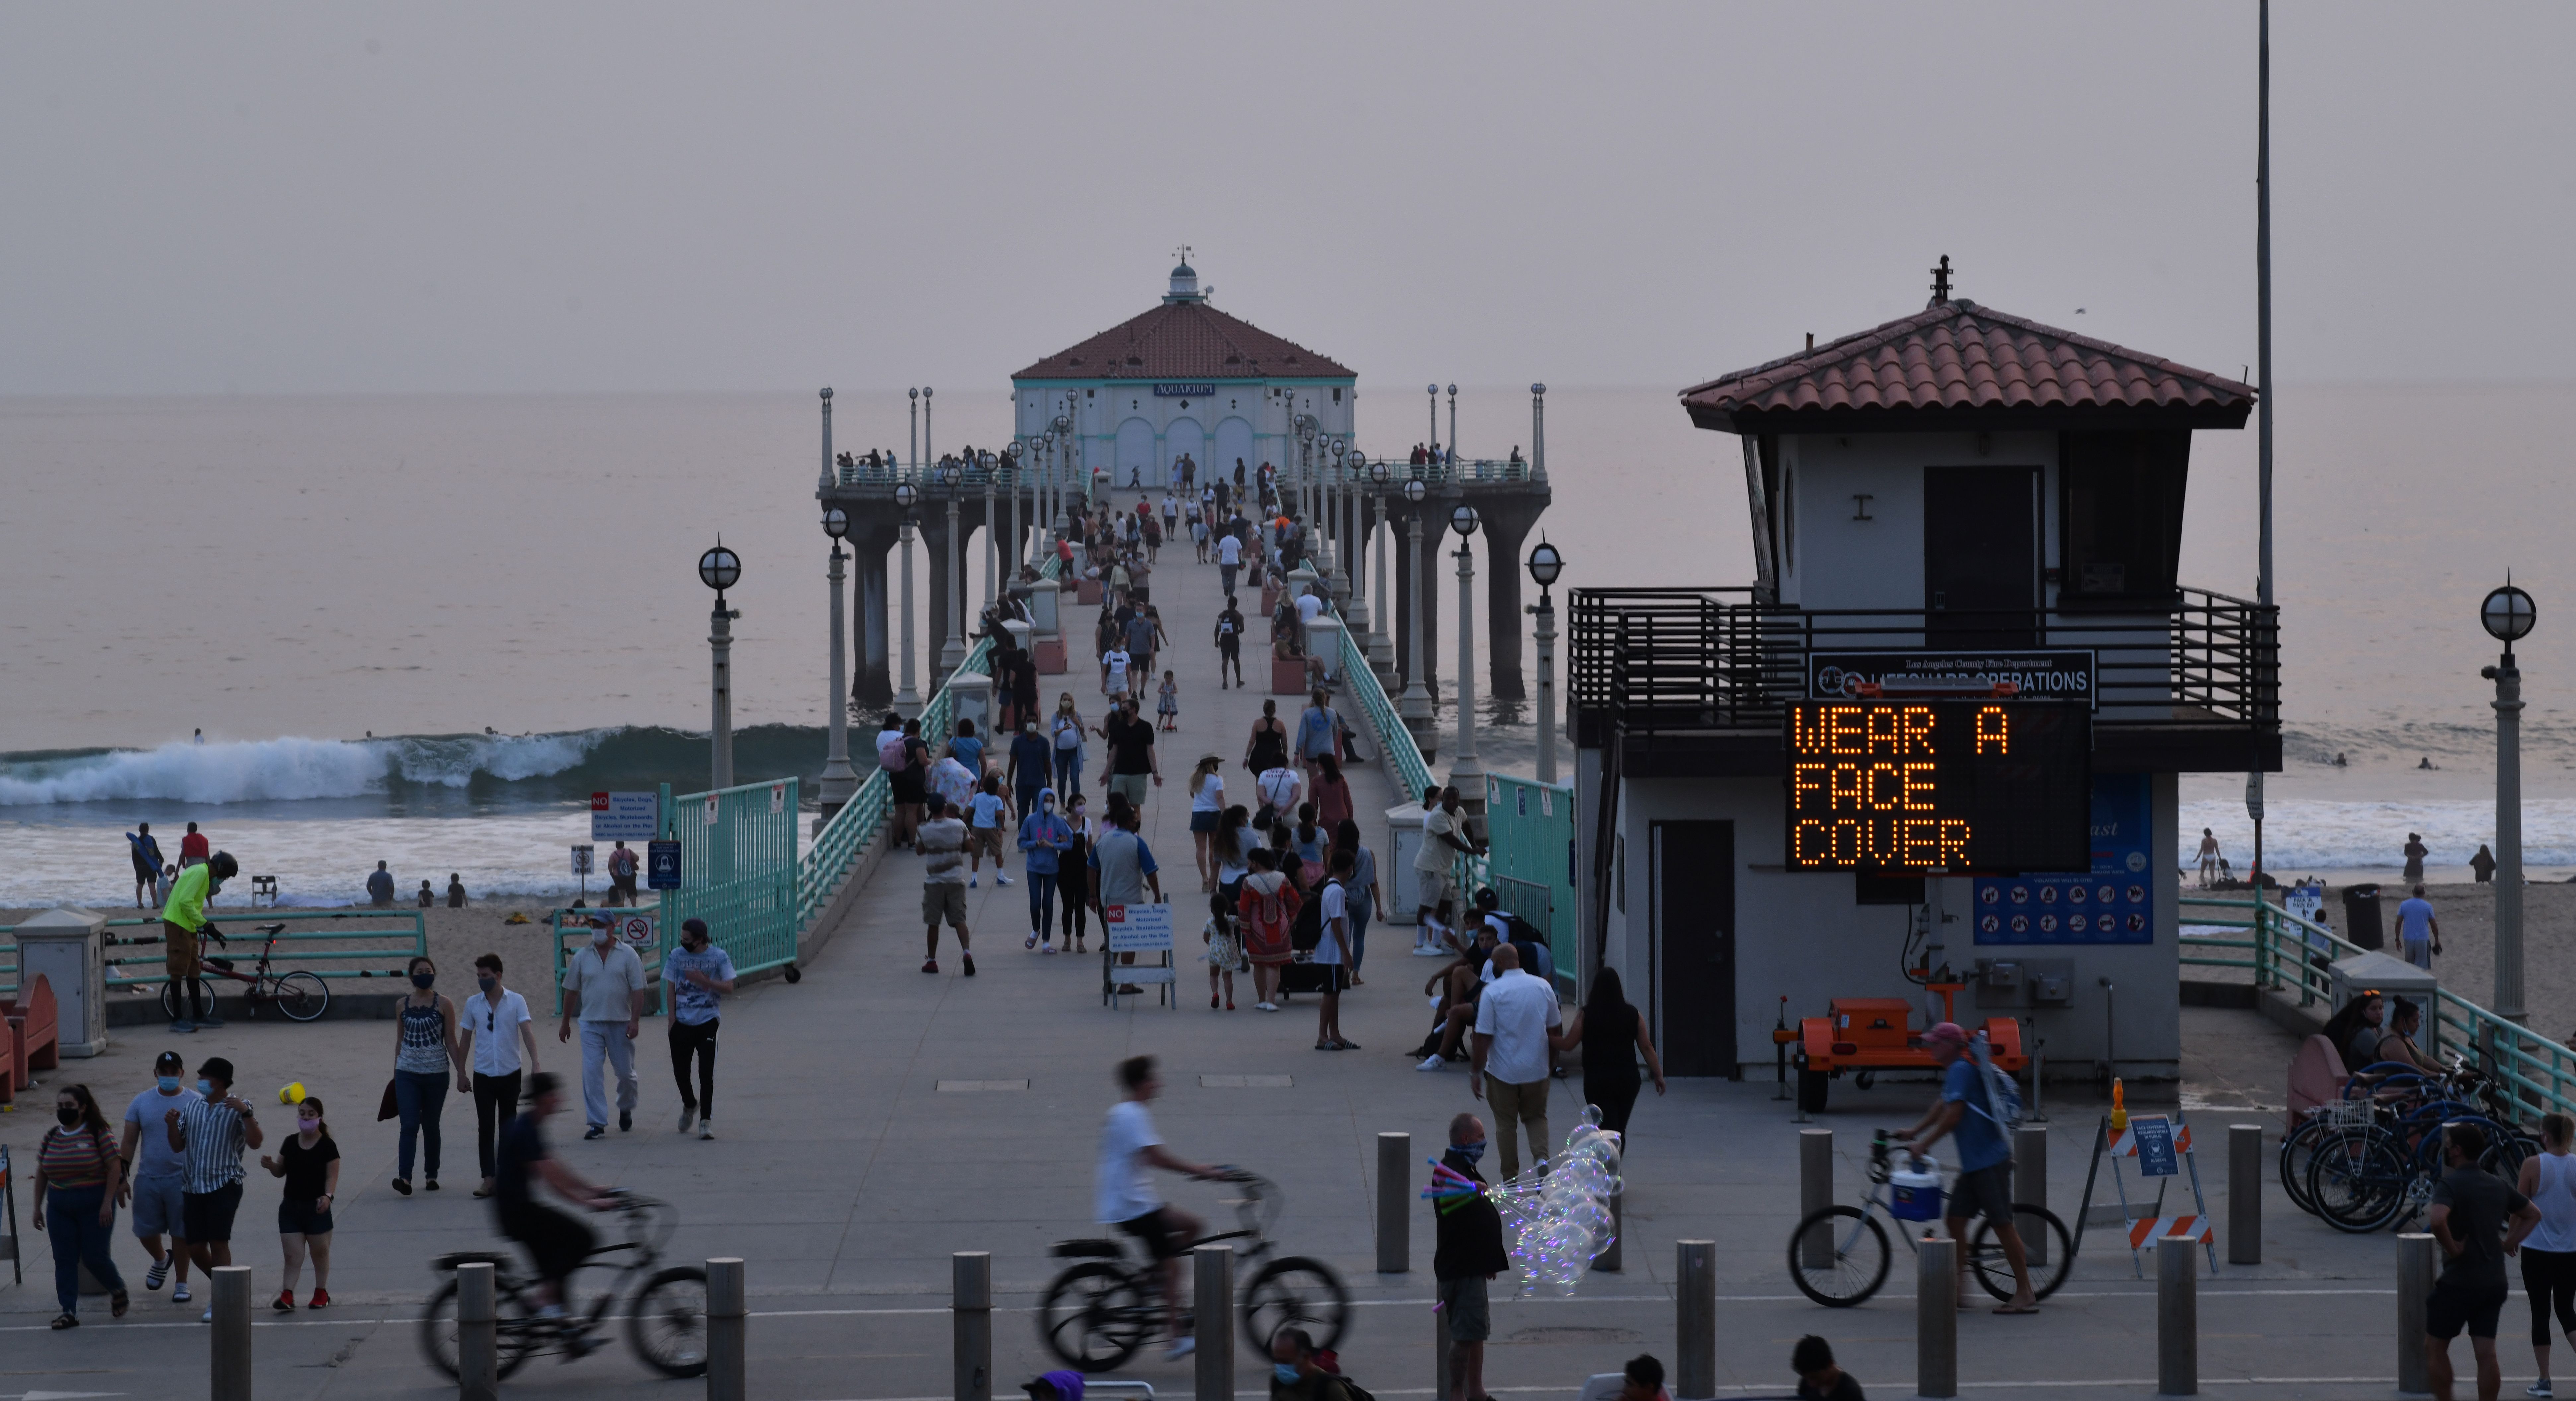 A sign reminding people to wear masks is seen by the pier on September 7 in Manhattan Beach, California.